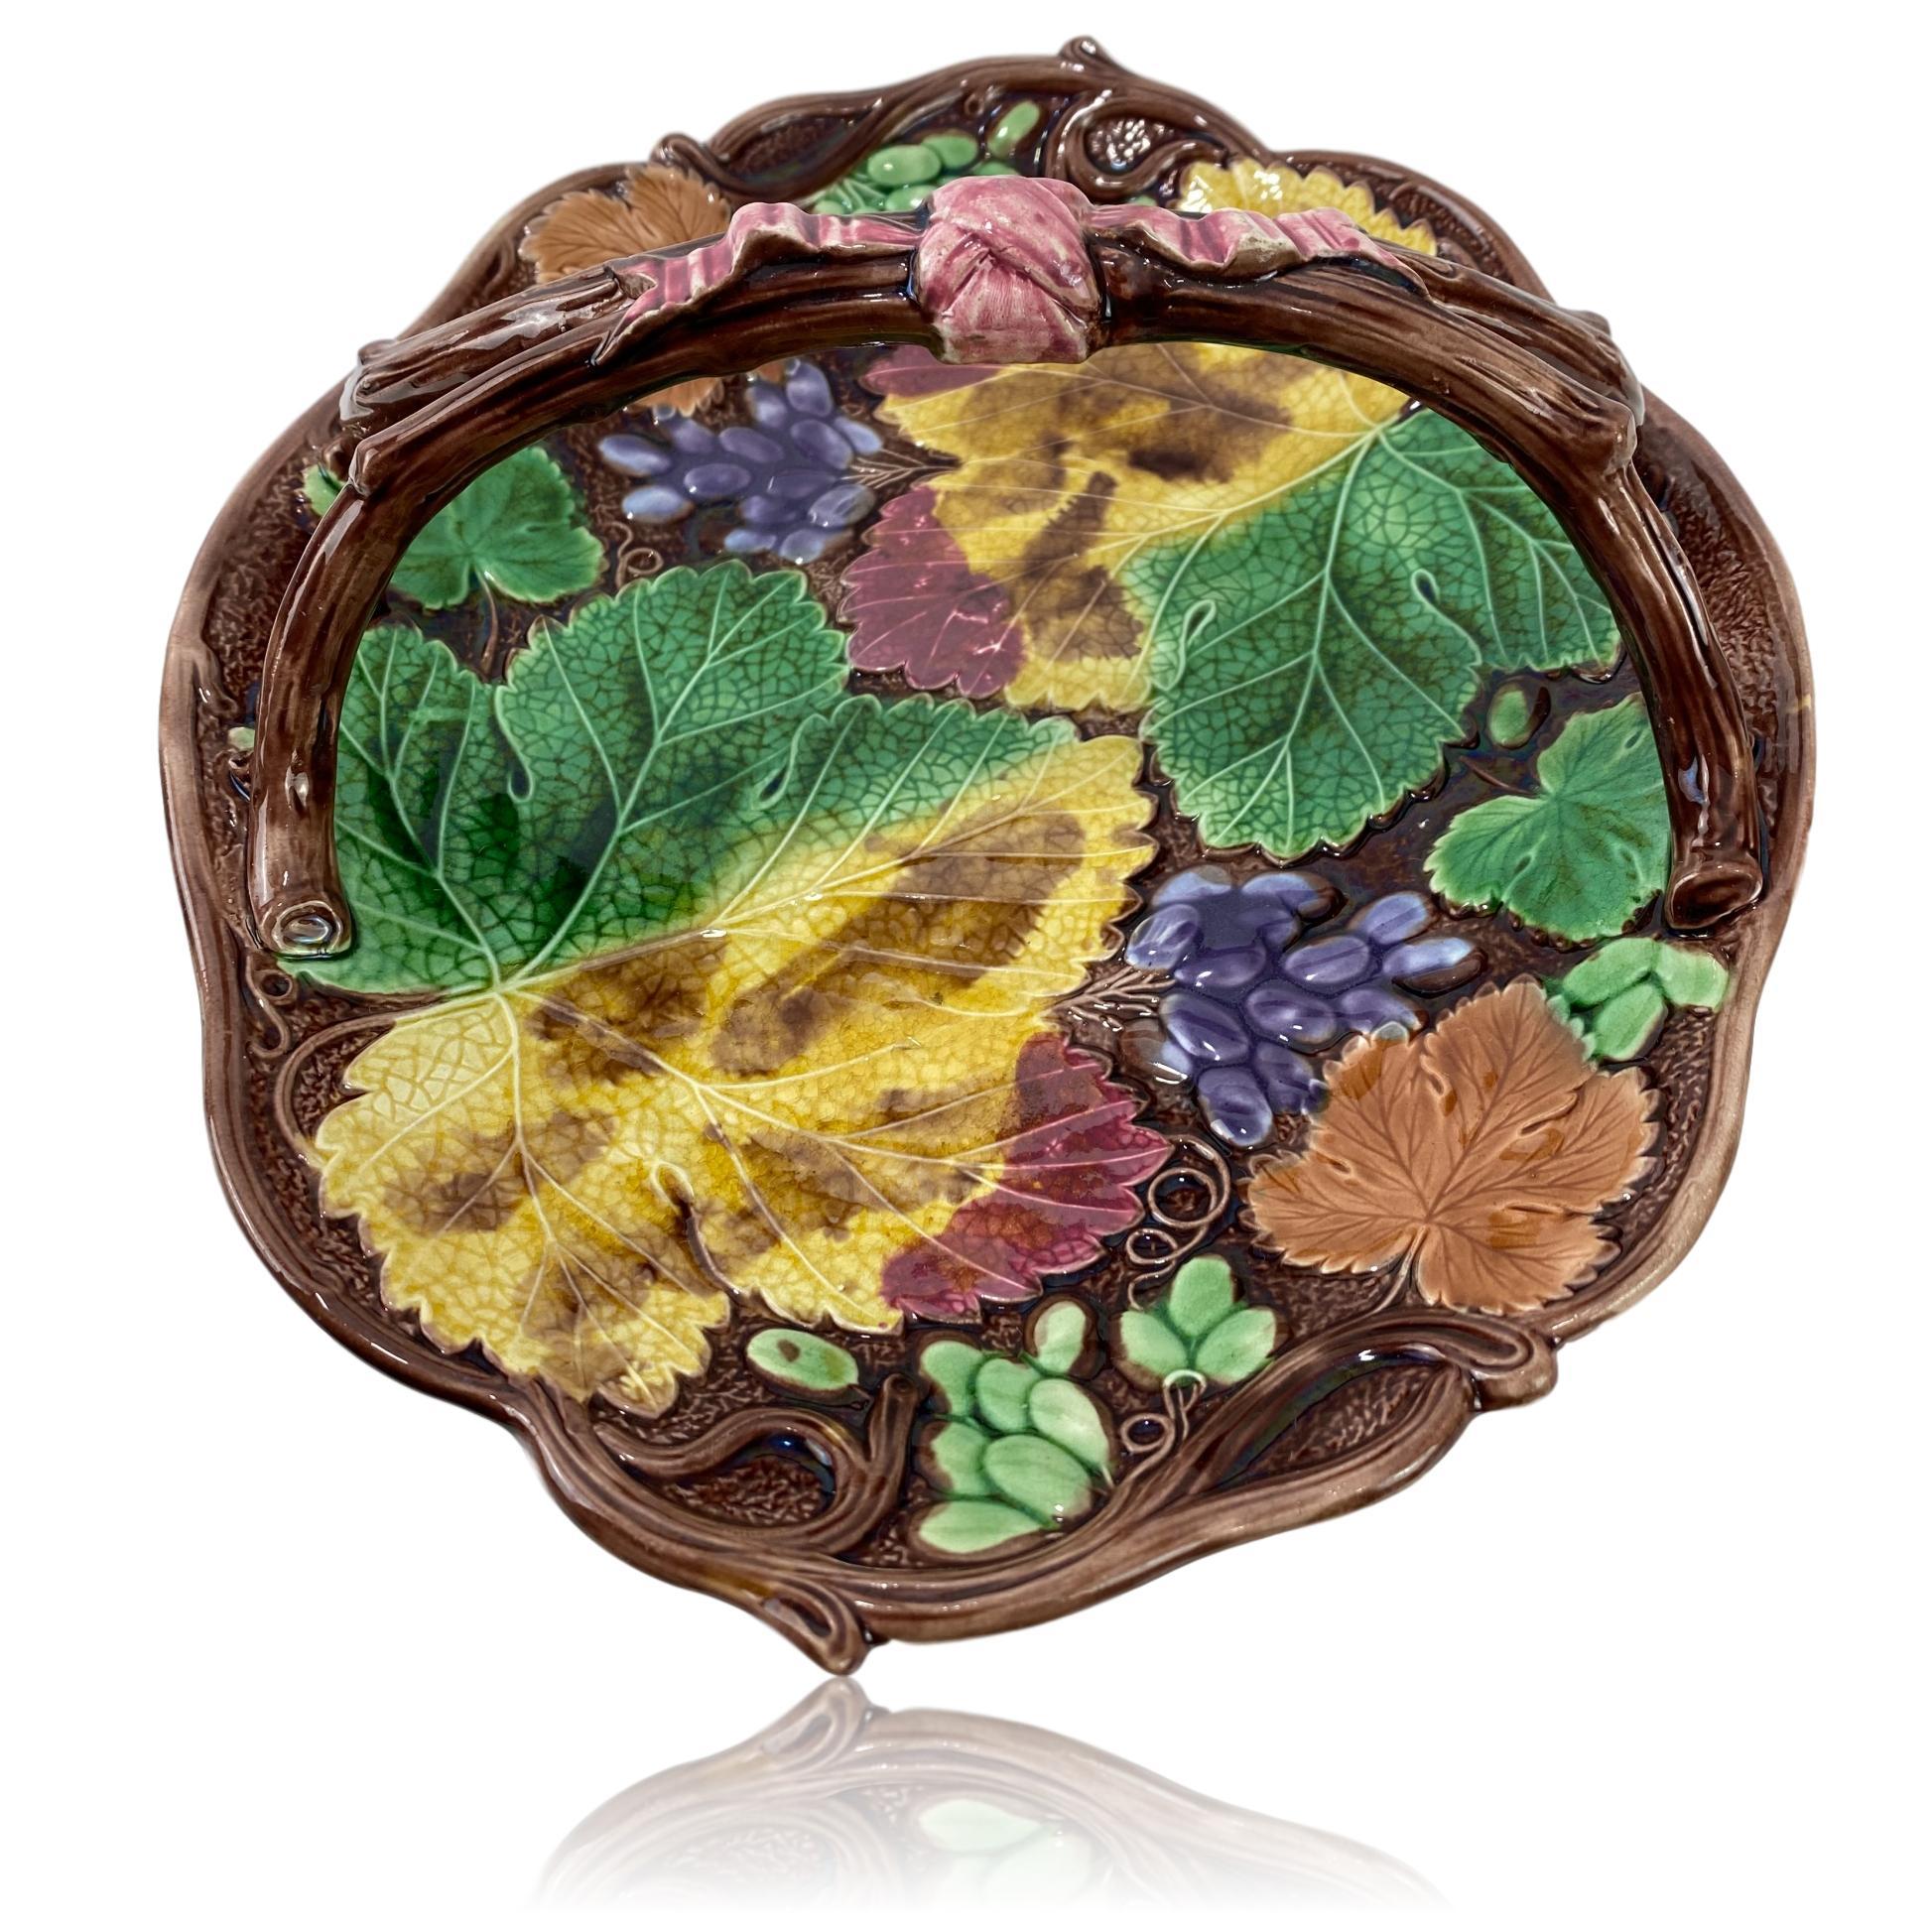 Wedgwood Majolica 'Colored Vine Bread Basket,' English, dated 1874, naturalistically modeled as a shaped oval dish bordered with grapevines, with purple and green grapes on a bed of autumn leaves, with simulated twigs forming the handle, surmounted